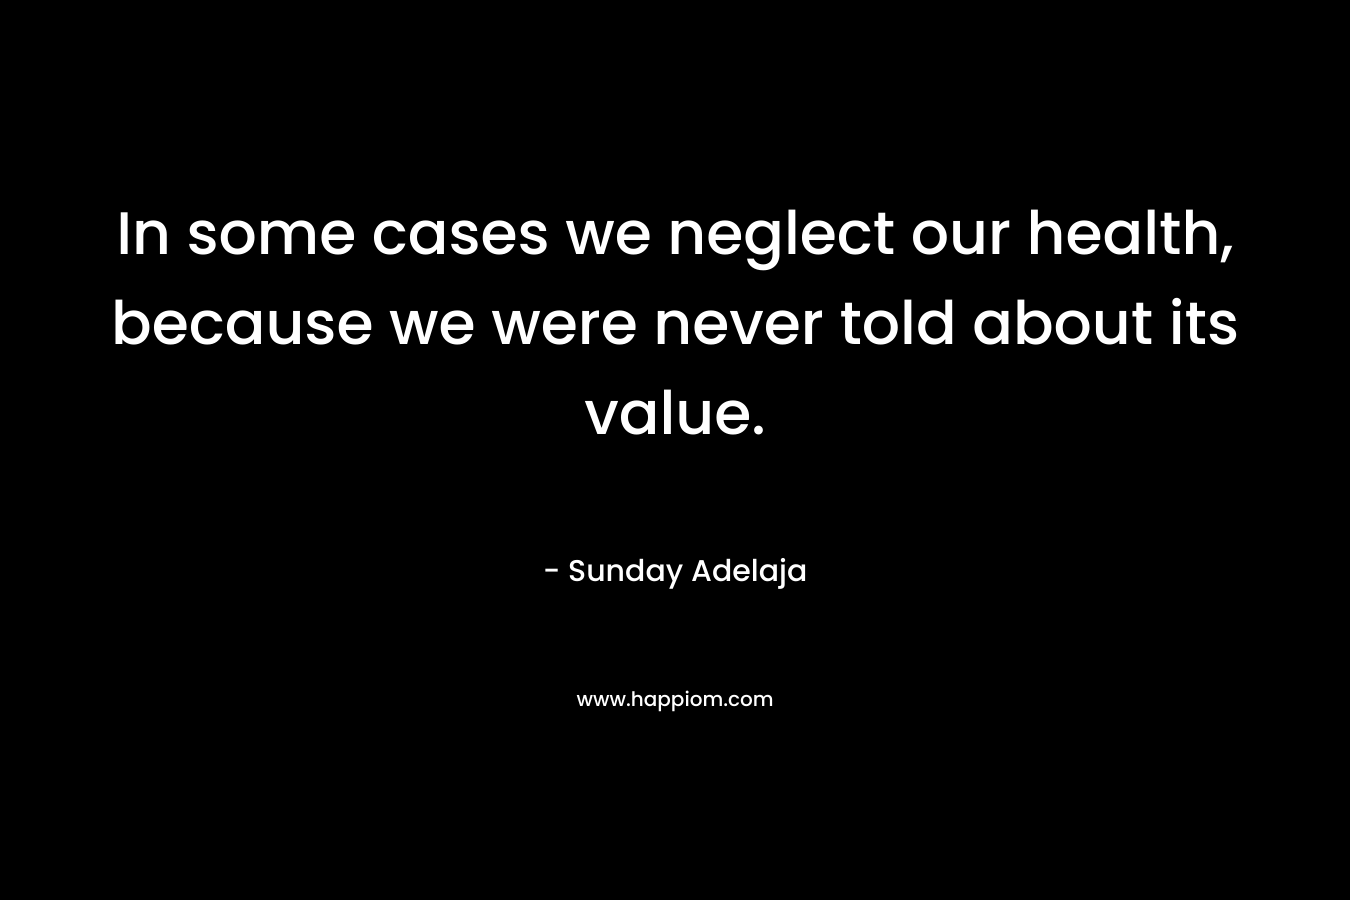 In some cases we neglect our health, because we were never told about its value.